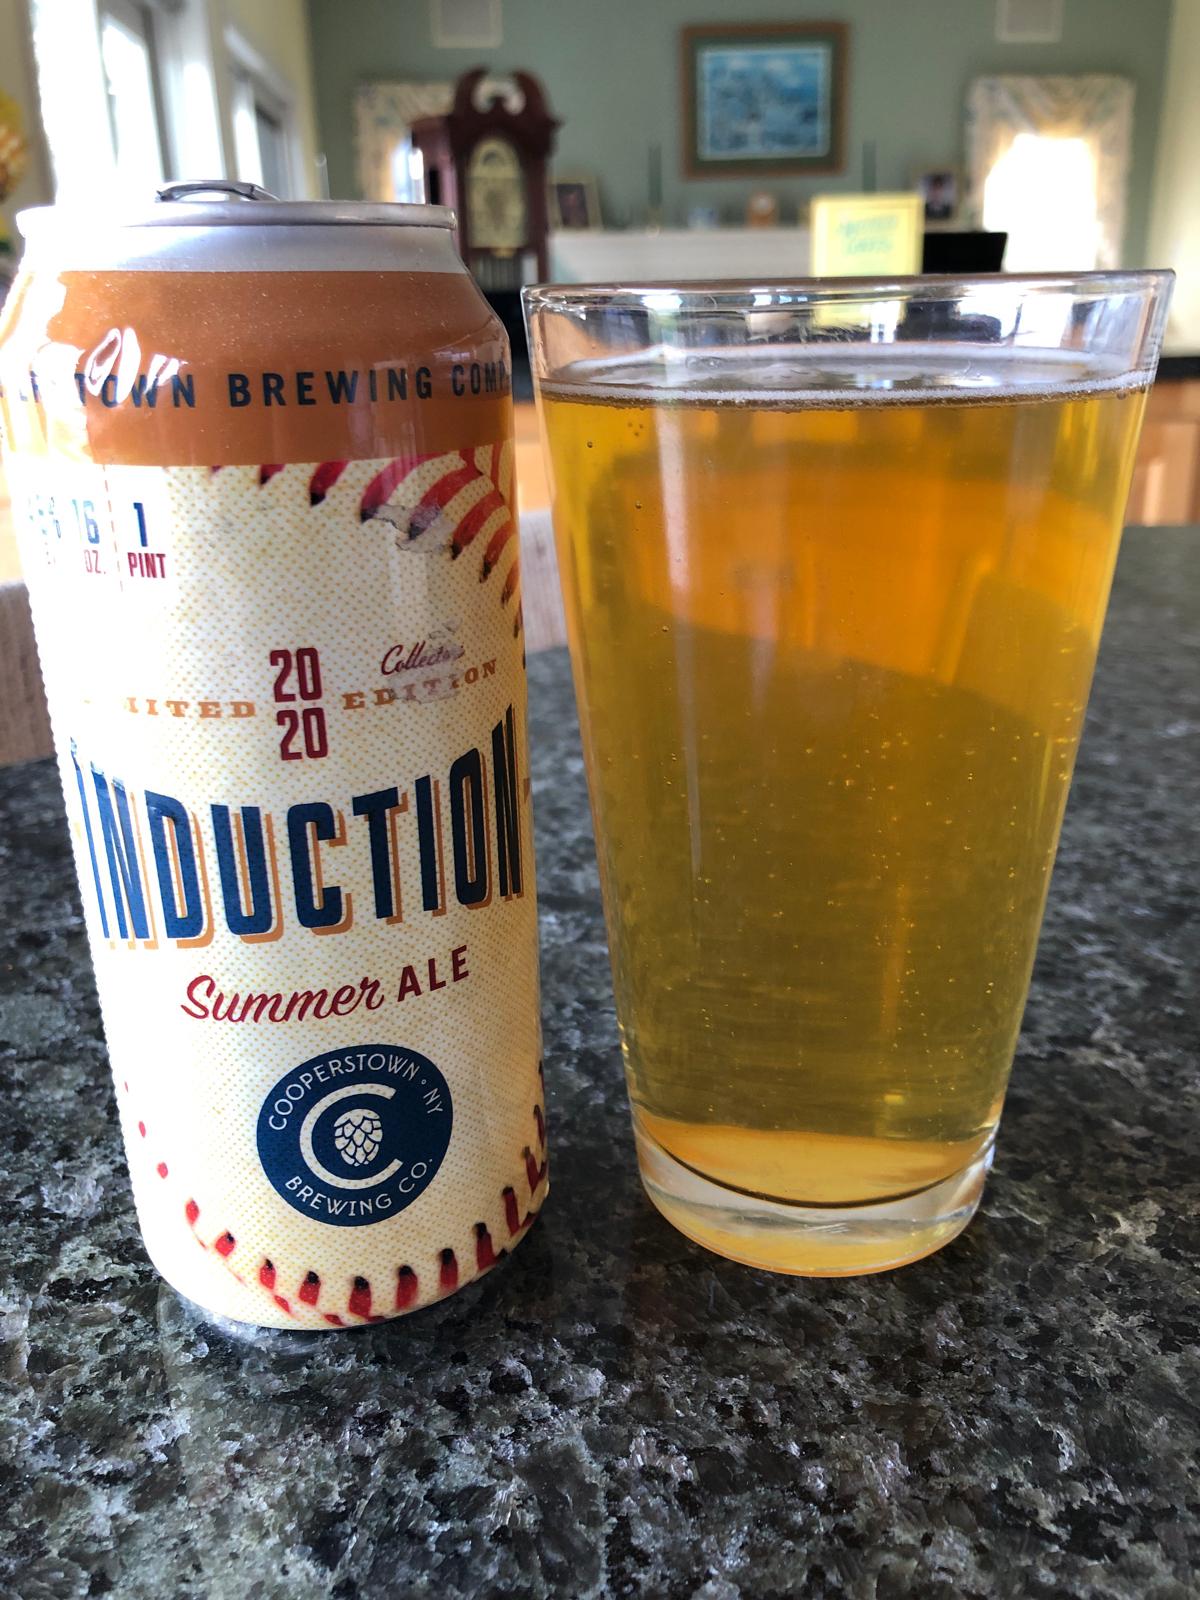 Induction Ale Summer (2020)